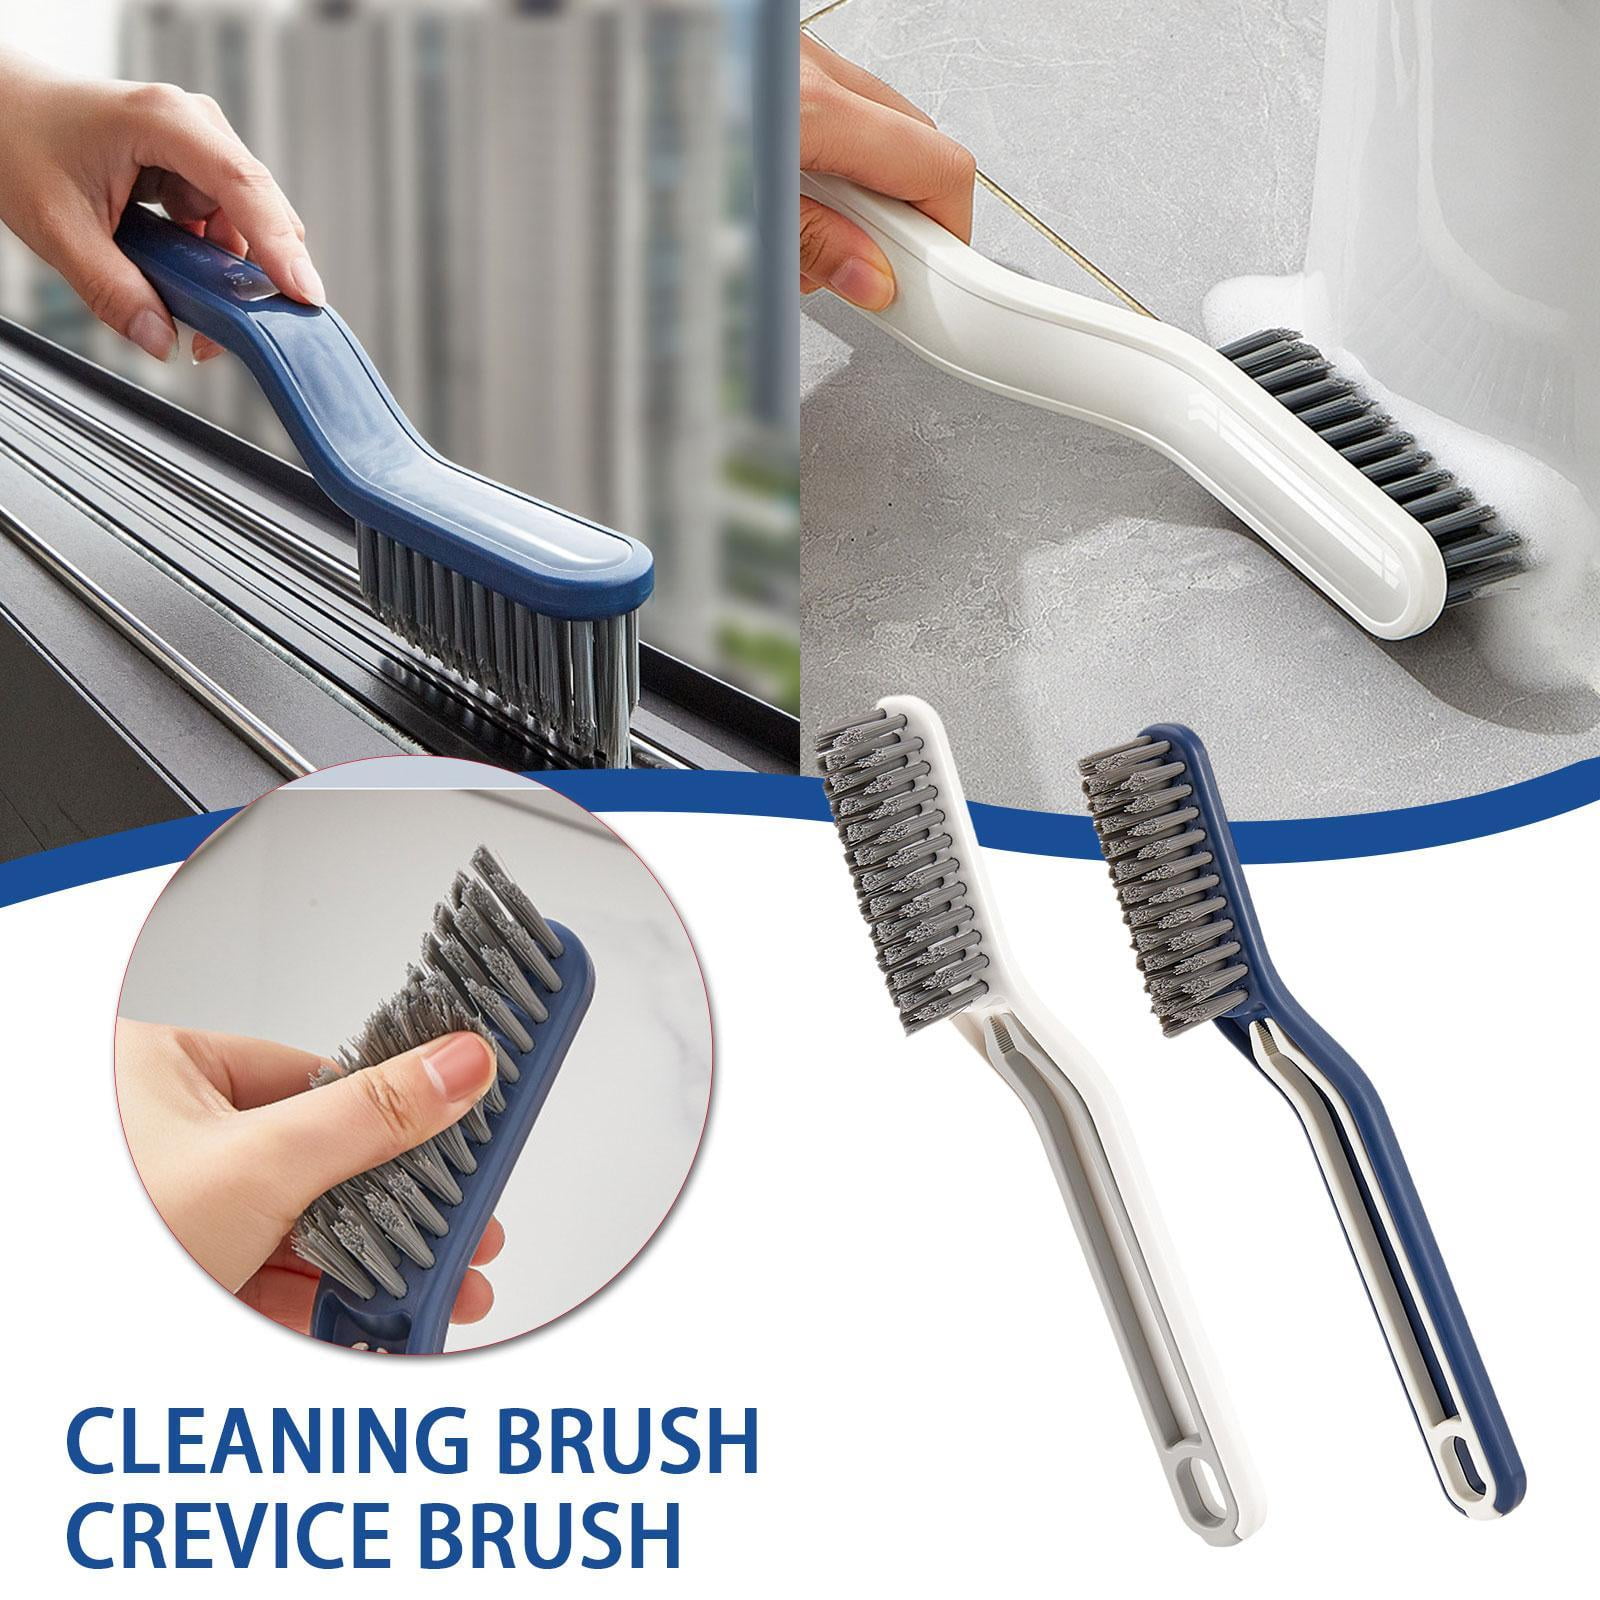 Kitchen Cleaning Brush Multifunctional Crevice Cleaning Brush With